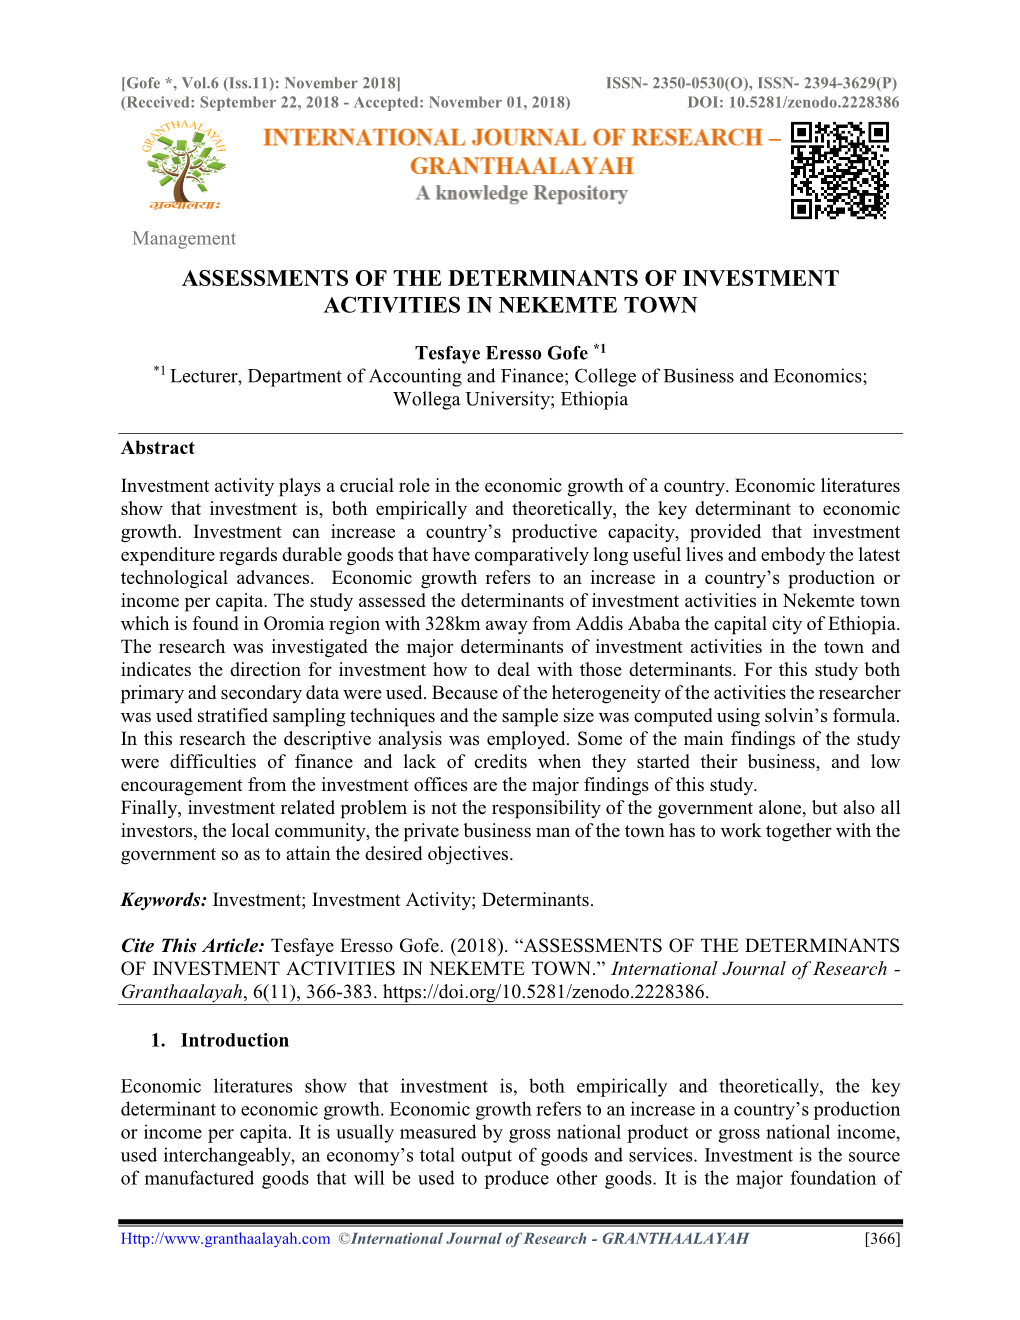 Assessments of the Determinants of Investment Activities in Nekemte Town